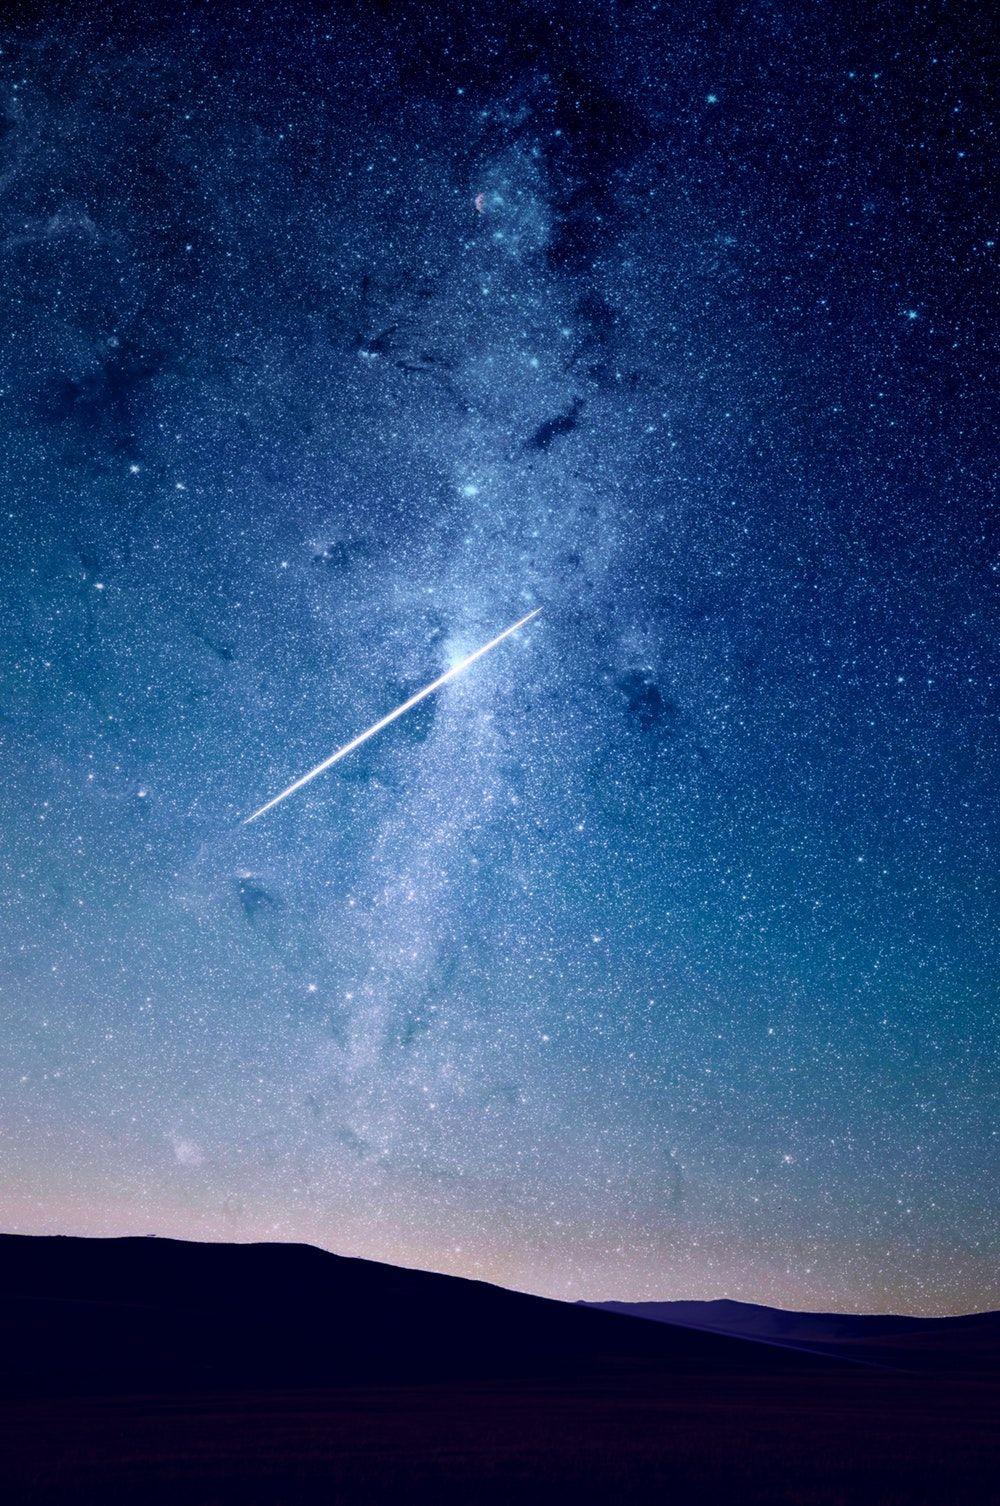 Shooting Star Picture. Download Free Image